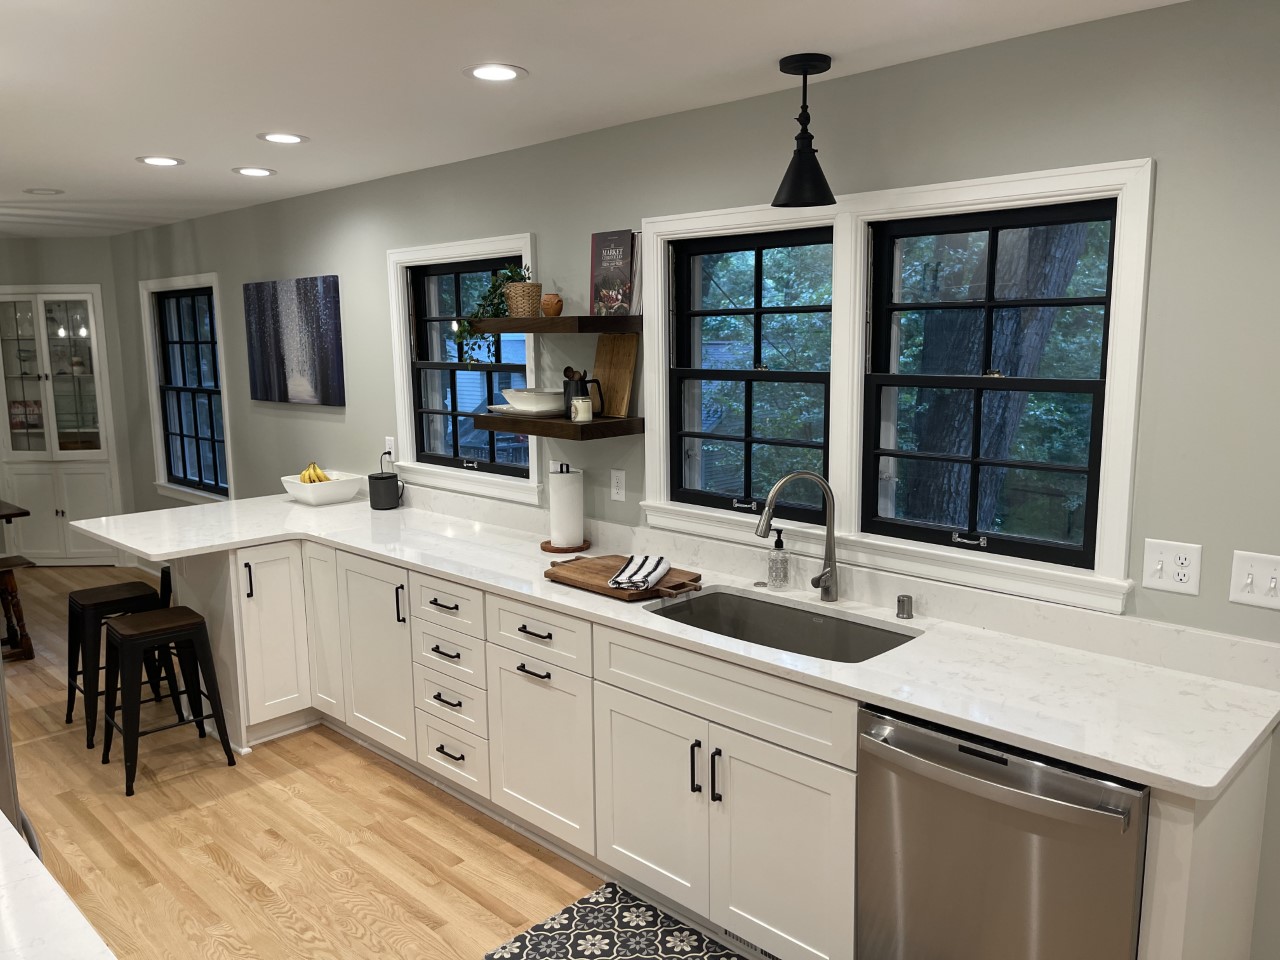 Kitchens | Madison, WI | Interiors by JW